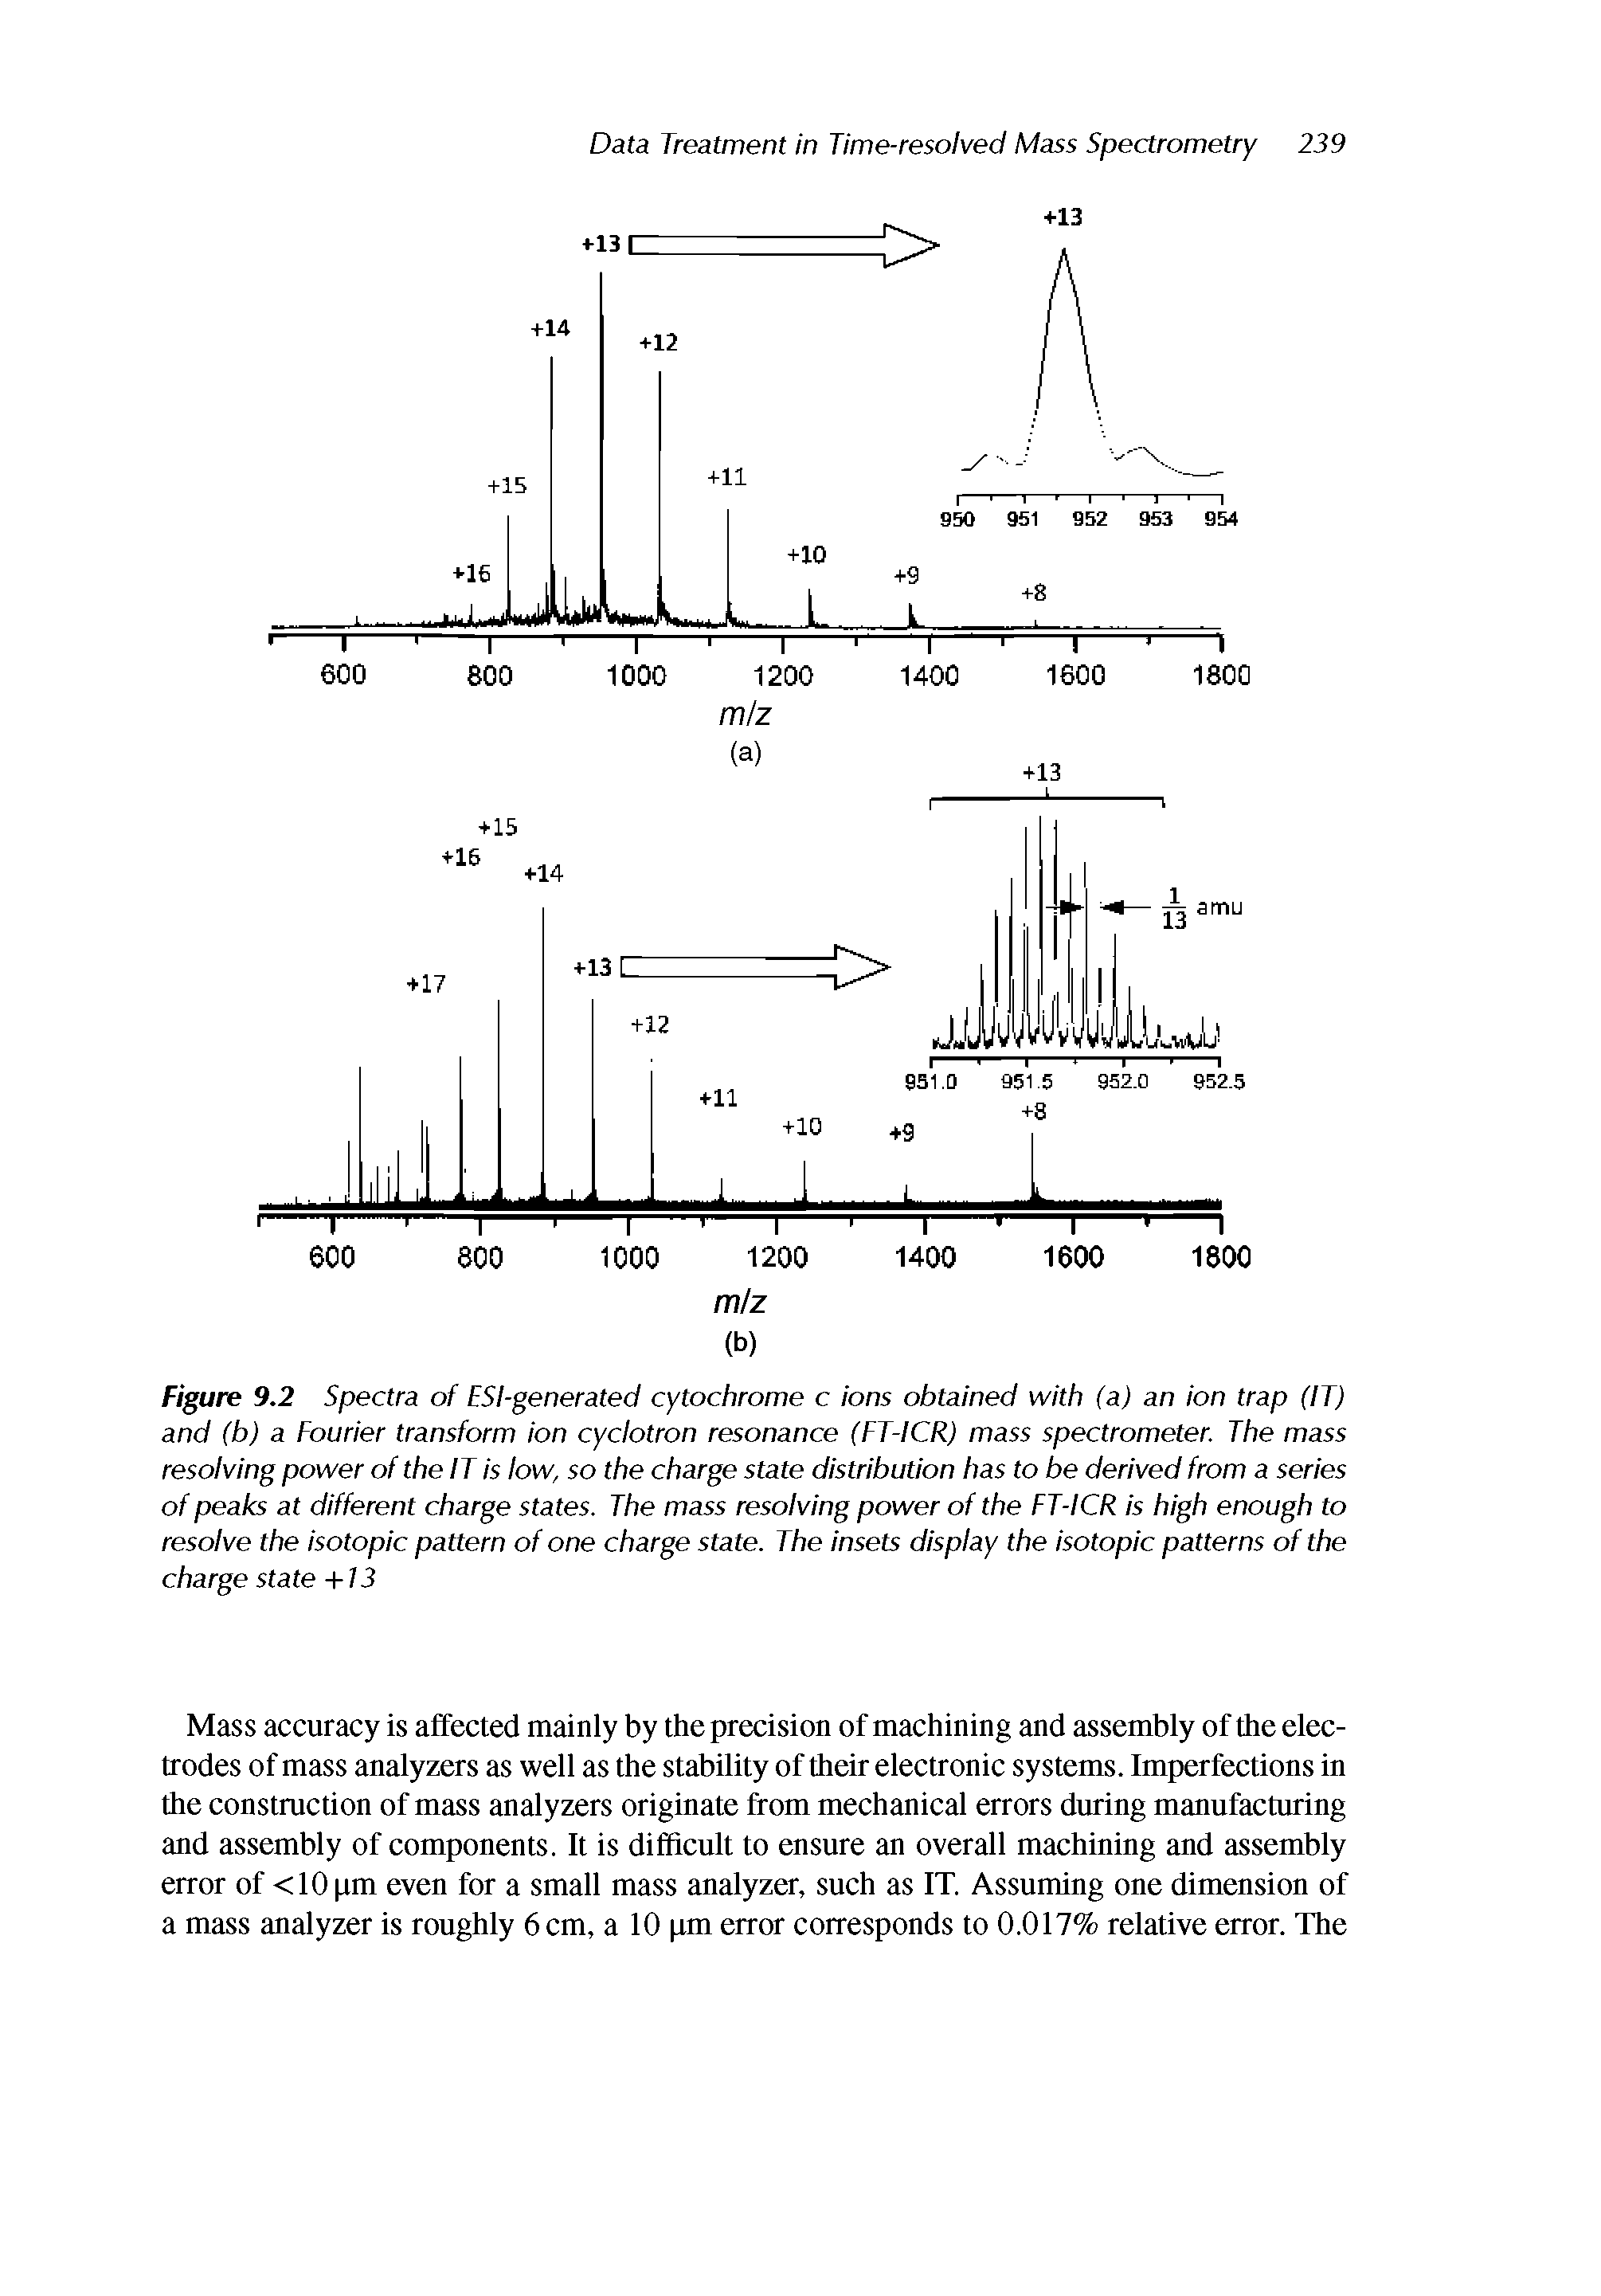 Figure 9.2 Spectra of ESTgenerated cytochrome c ions obtained with (a) an ion trap (IT) and (b) a Fourier transform ion cyclotron resonance (FT-ICR) mass spectrometer. The mass resolving power of the IT is low, so the charge state distribution has to be derived from a series of peaks at different charge states. The mass resolving power of the FT-ICR is high enough to resolve the isotopic pattern of one charge state. The insets display the isotopic patterns of the charge state +/3...